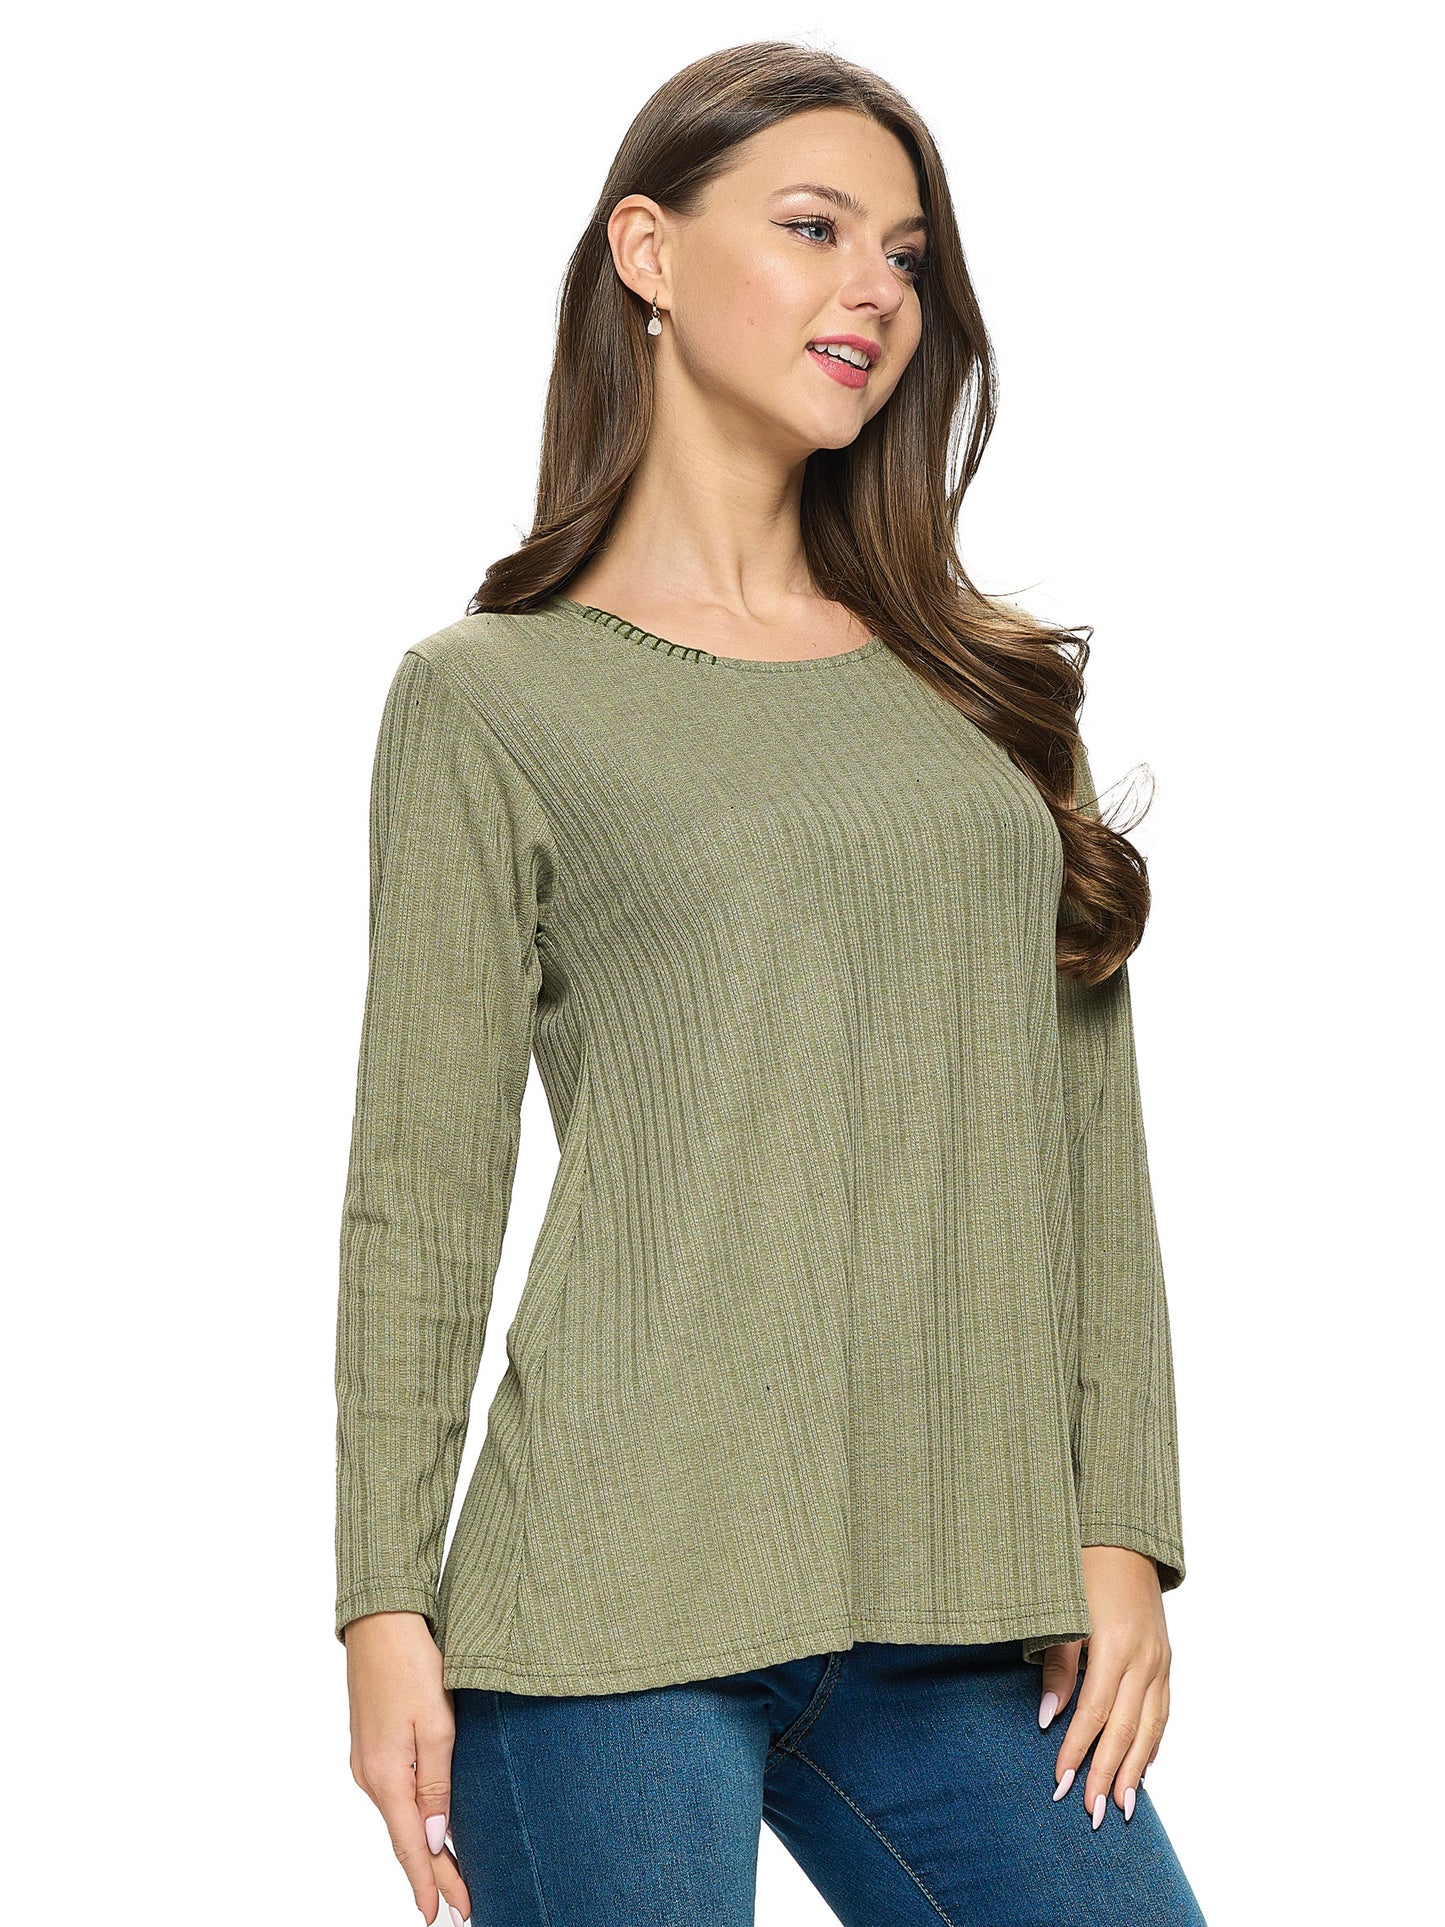 Top Casual Ribbed Knit Handstitch Details